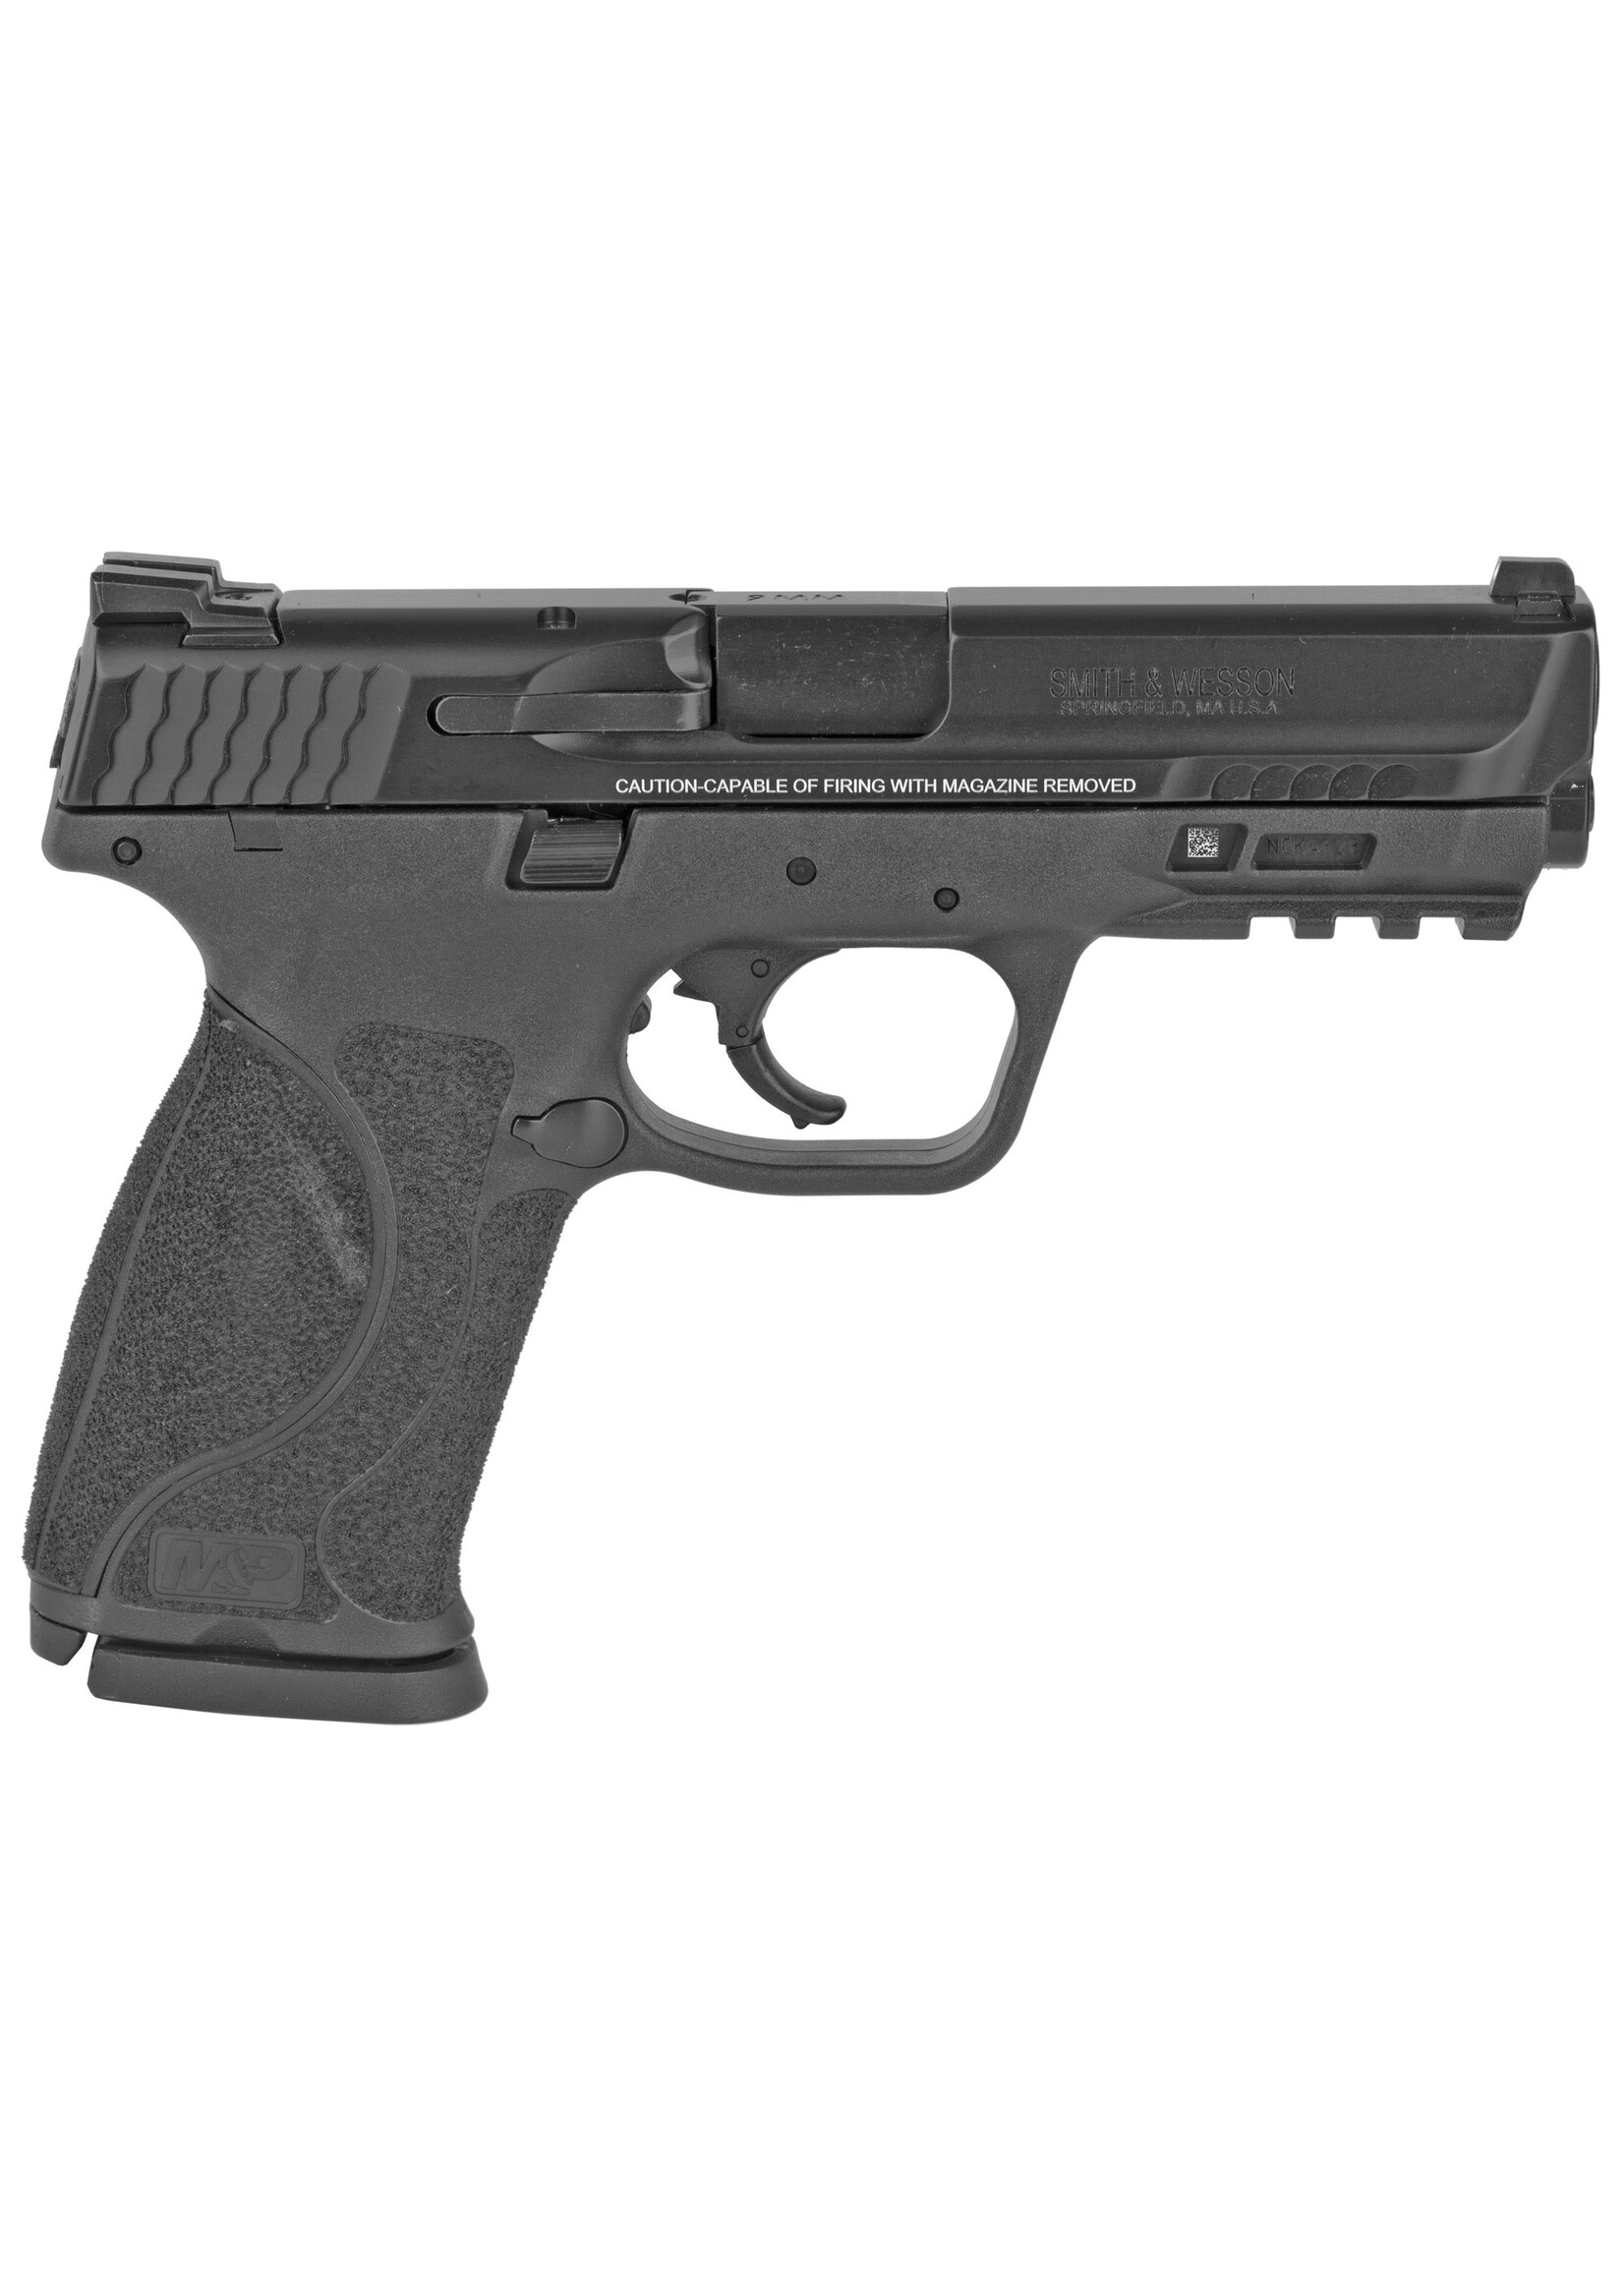 SMITH & WESSON SMITH & WESSON M&P9 M2.0 CARRY & RANGE KIT 9MM 17RD 4.25"